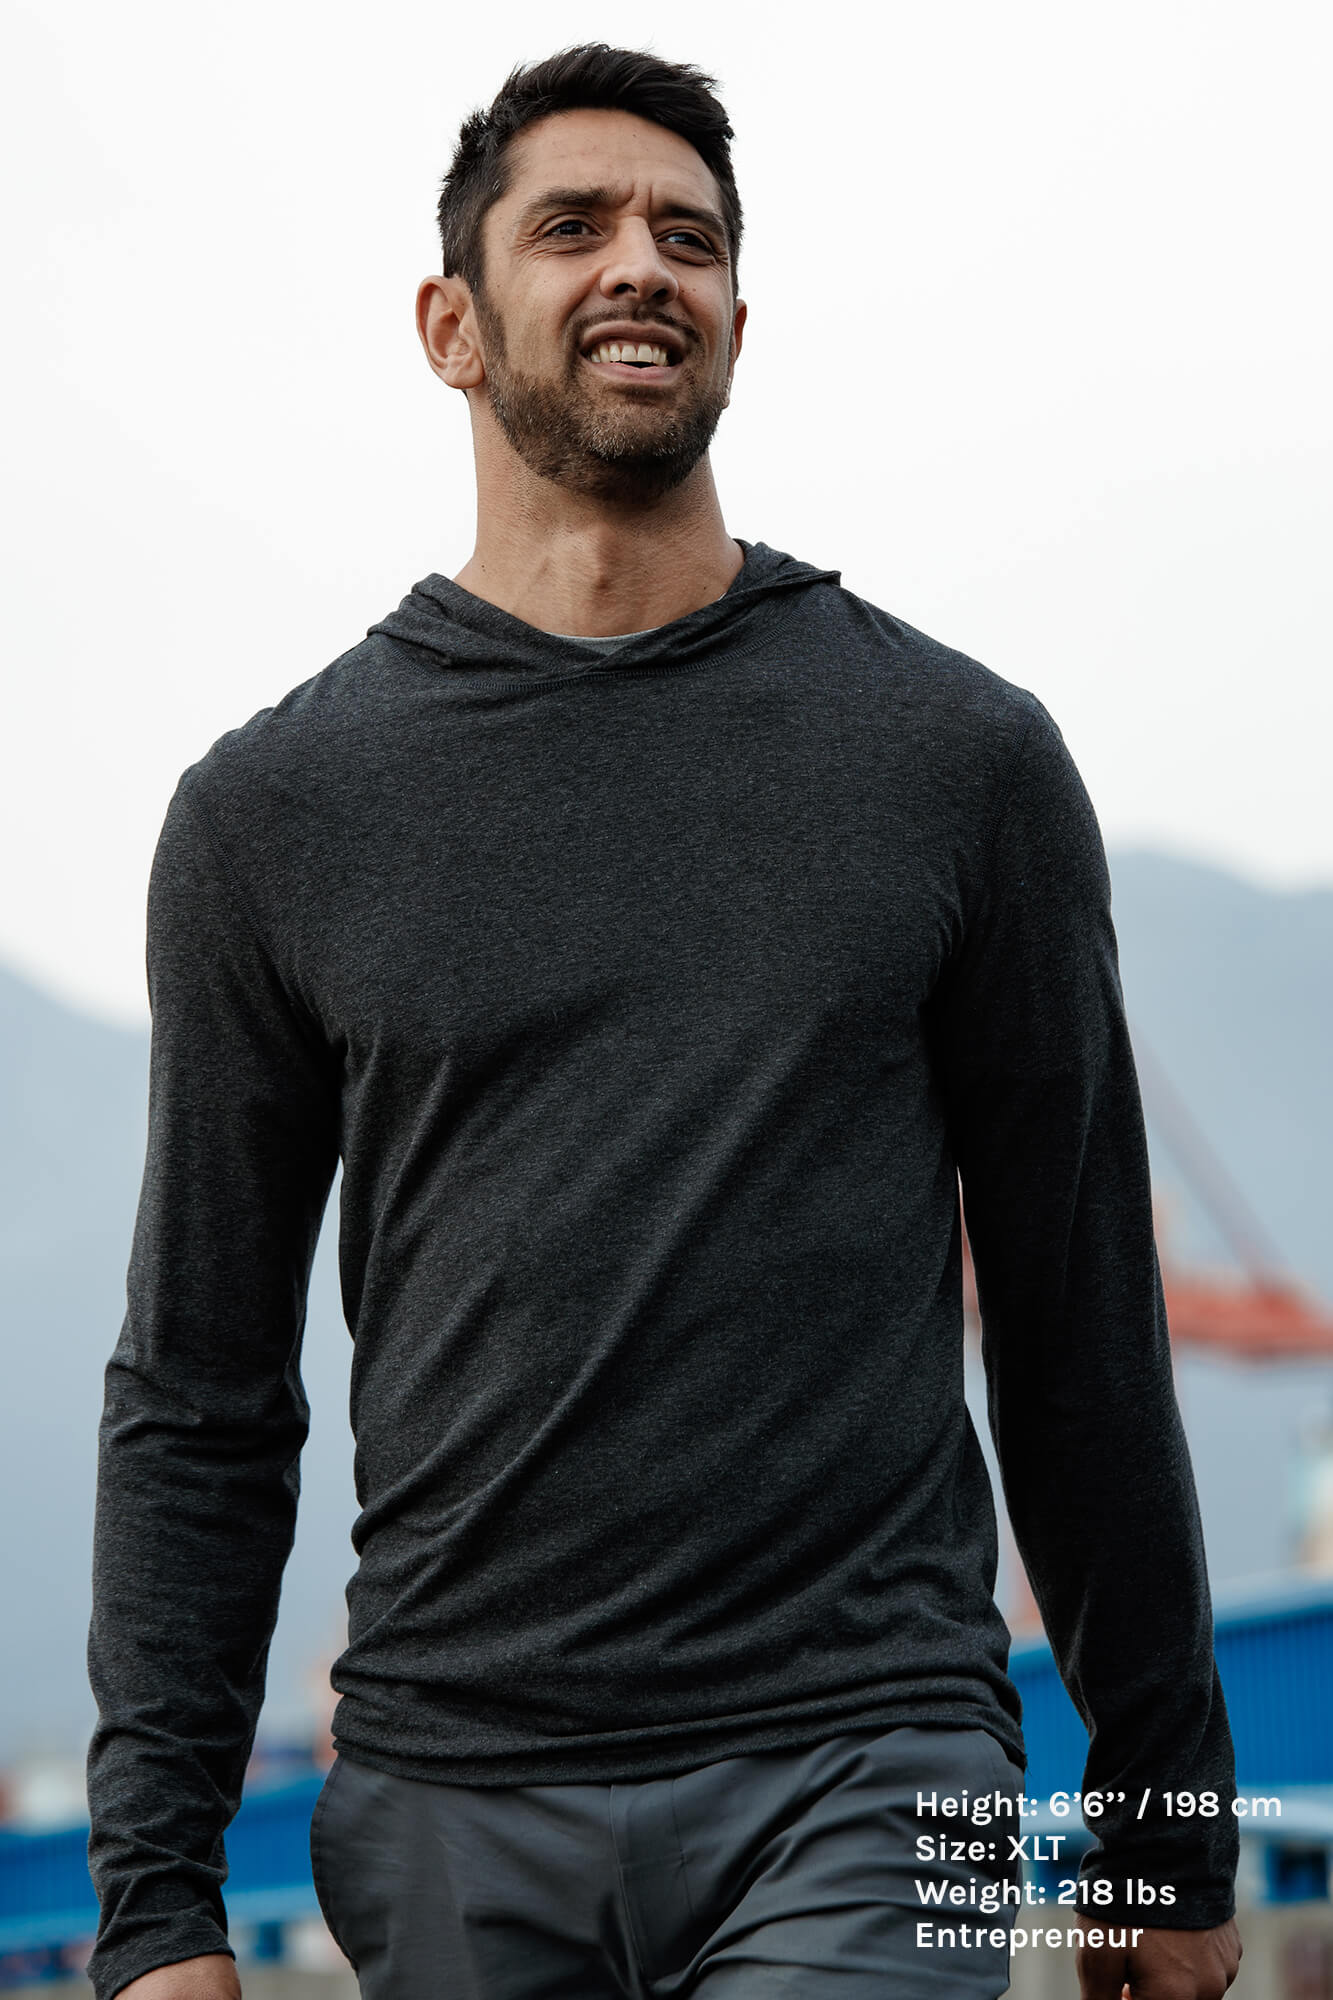 The Navas Lab Vasquez Microstripe xlt hoodie for taller men in Charcoal mix. The perfect tall slim shirt for tall and slim guys looking for style and comfort.